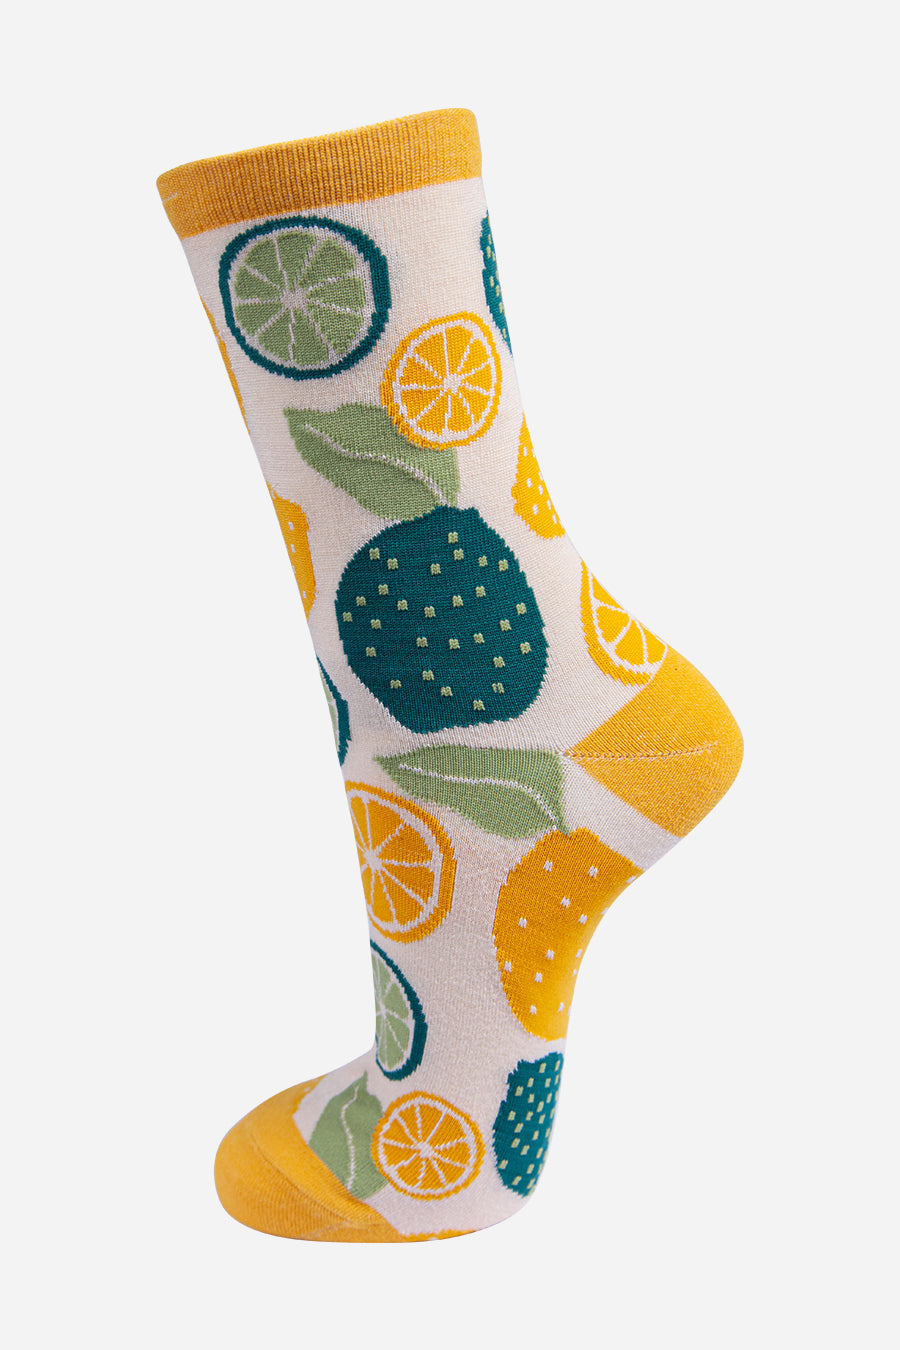 cream and yellow bamboo socks with an all over pattern of limes and lemon fruits